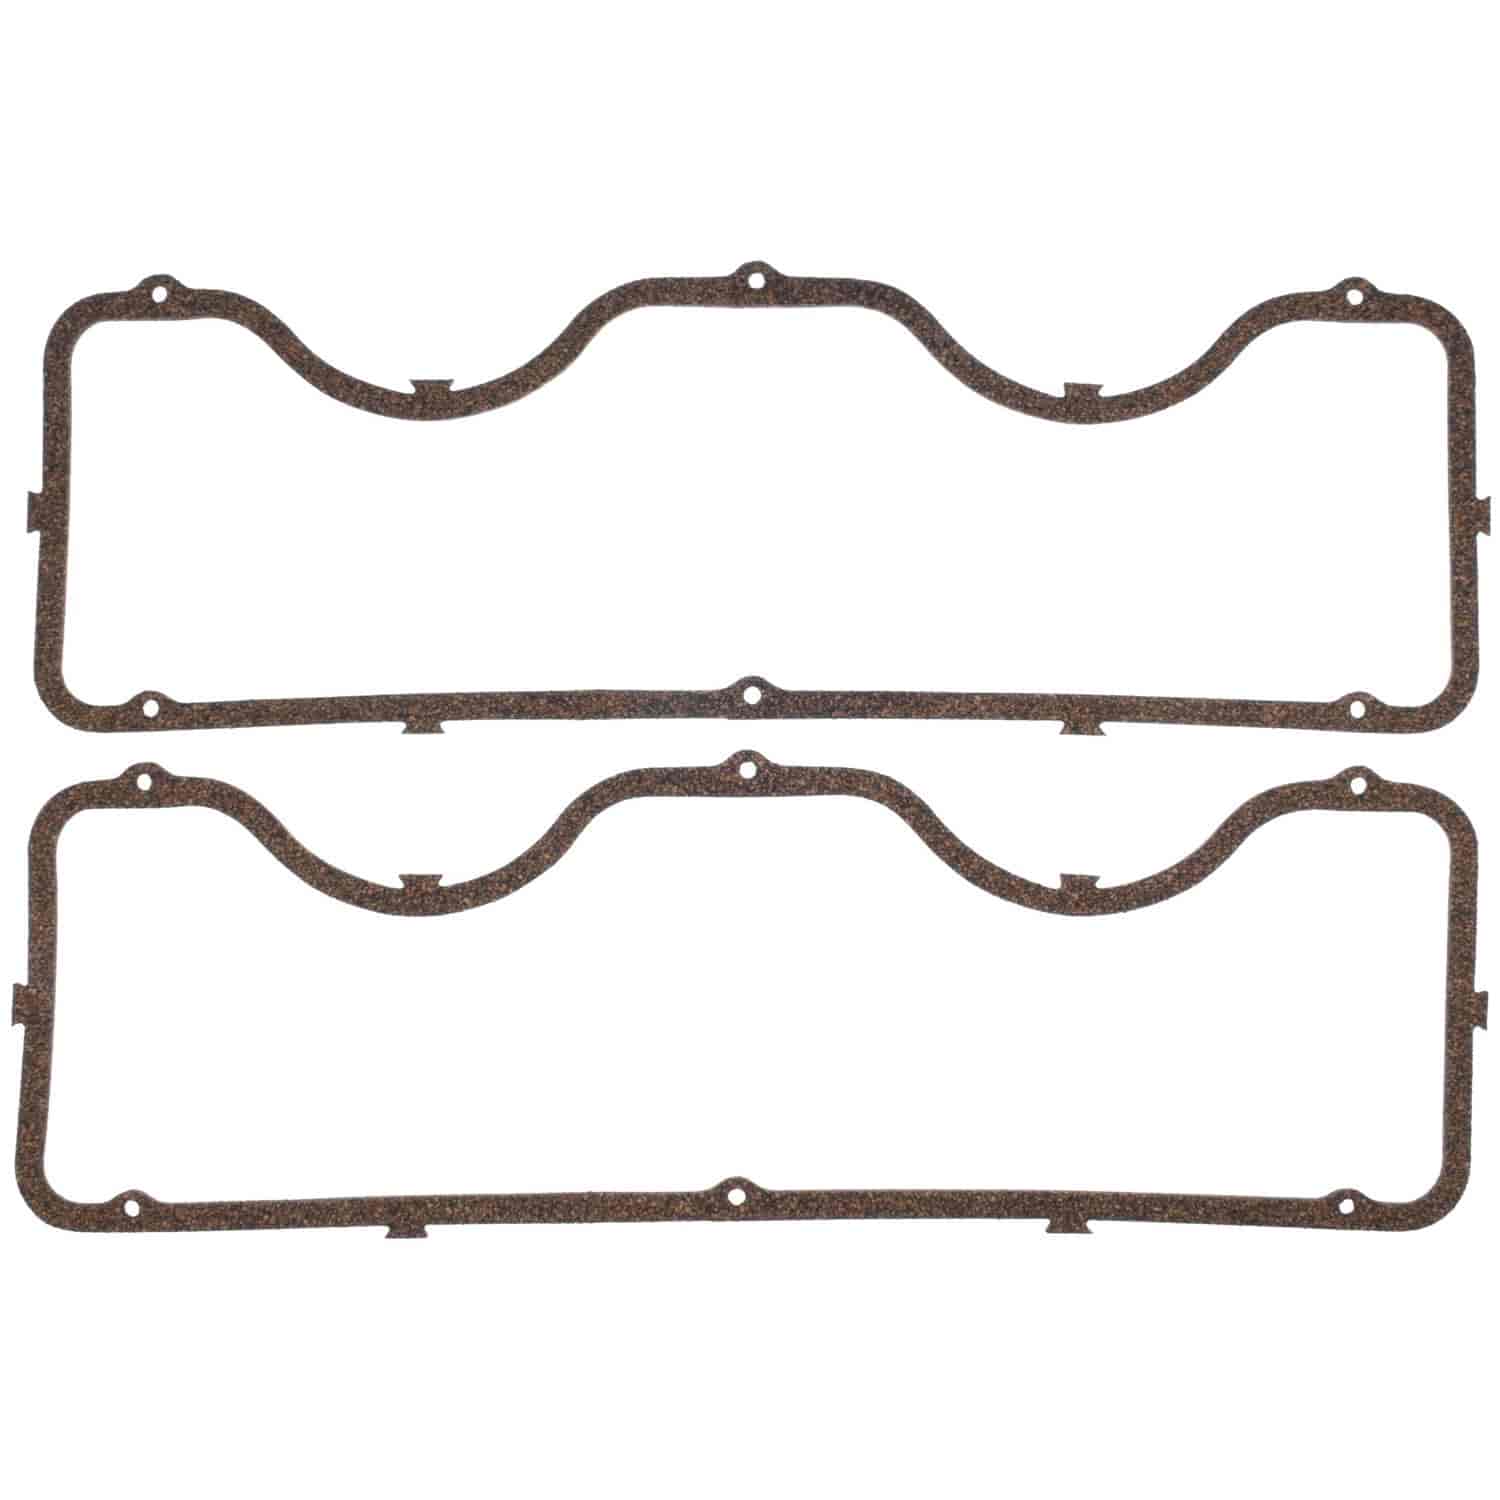 Valve Cover Gasket Set 1958-1965 Chevy W-Series 348/409 in Cork-Rubber